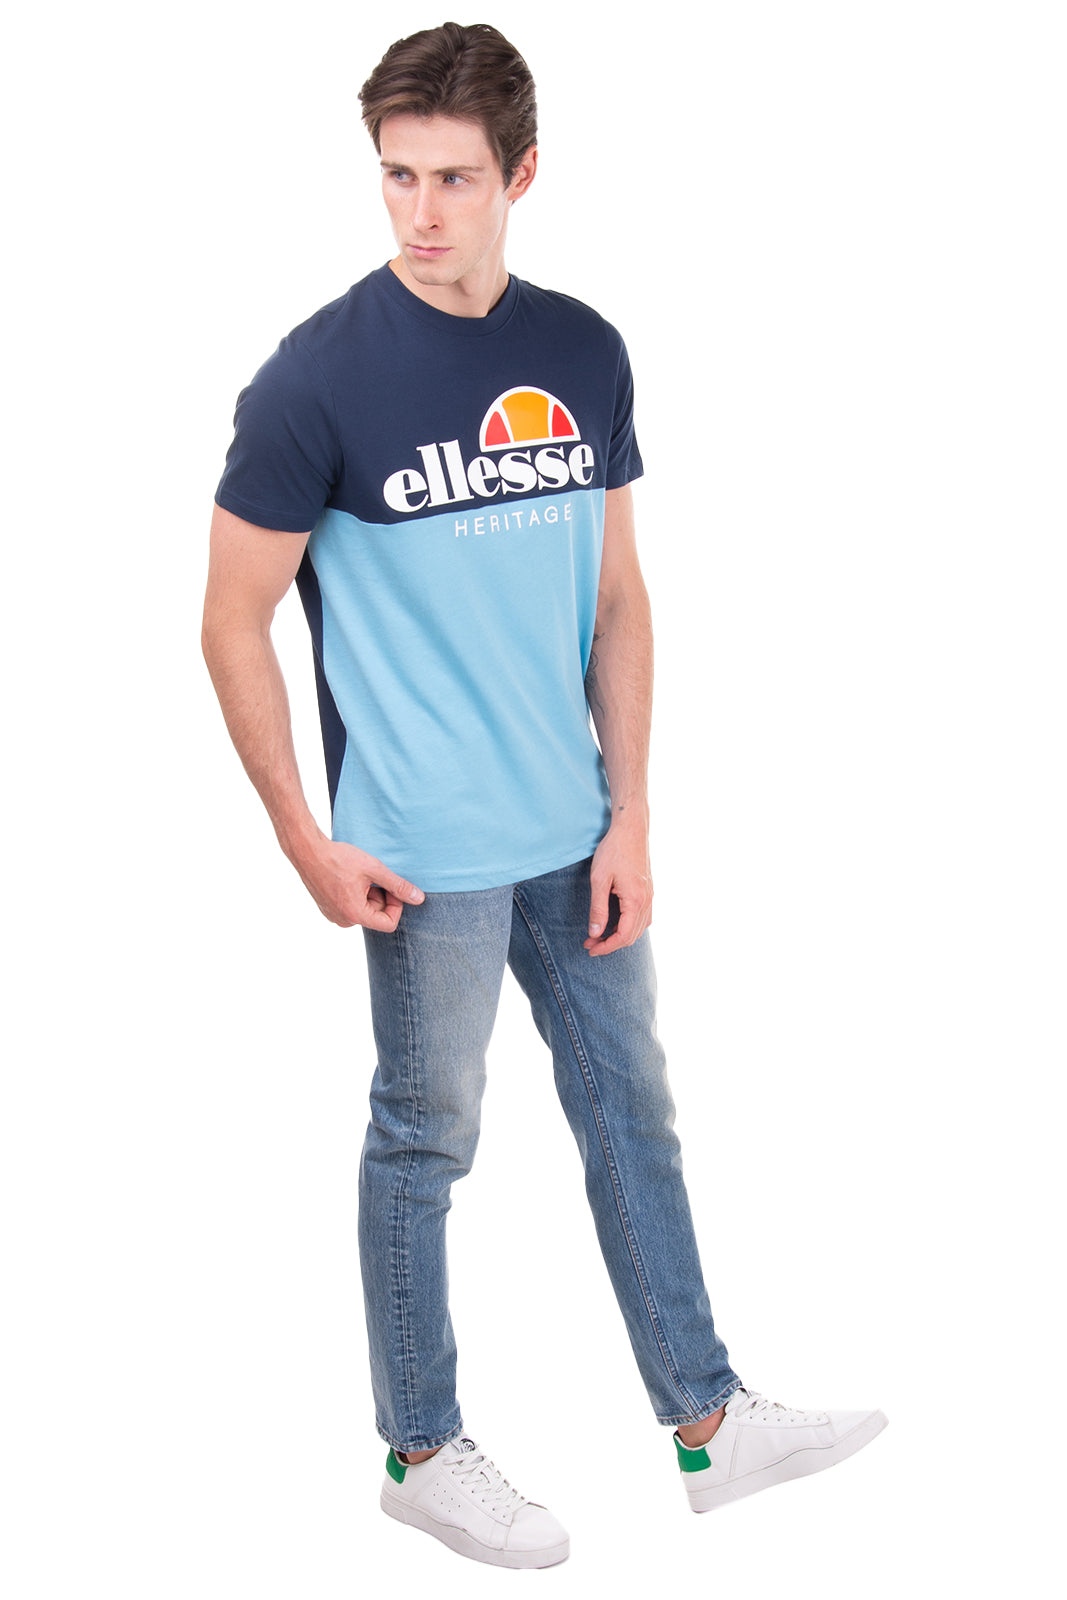 ELLESSE T-Shirt Top Size L LIMITED Coated Logo Front Crew Neck Short Sleeve gallery main photo